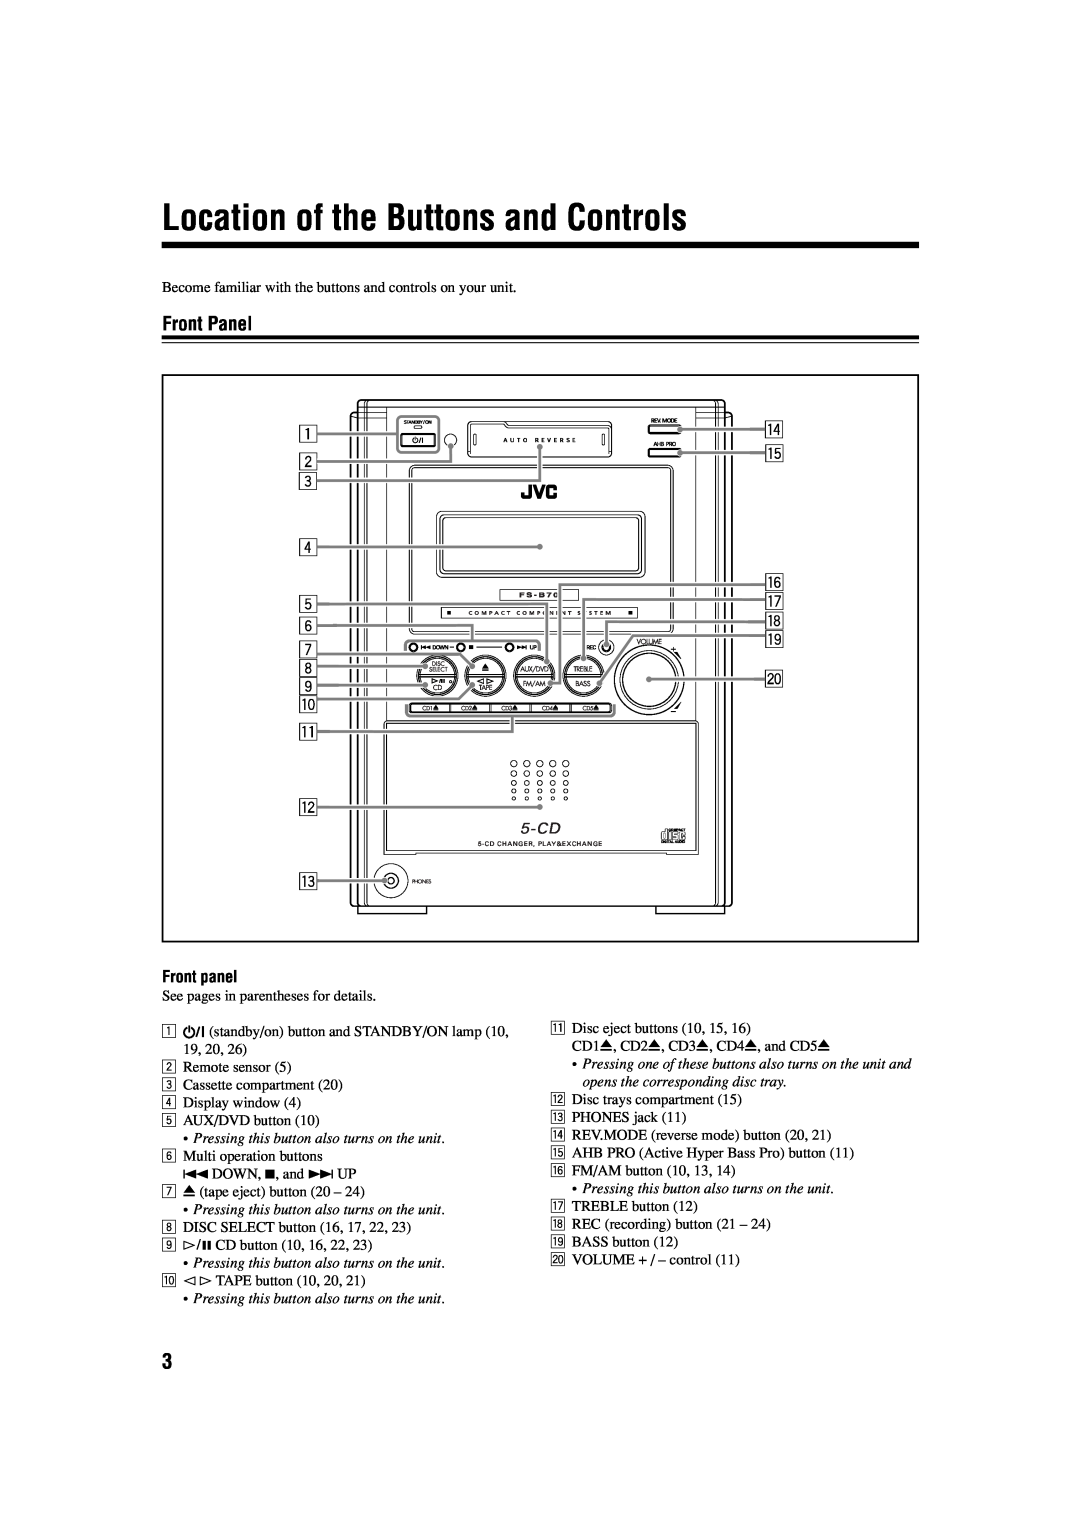 JVC CA-FSB70 manual Location of the Buttons and Controls, Front Panel 